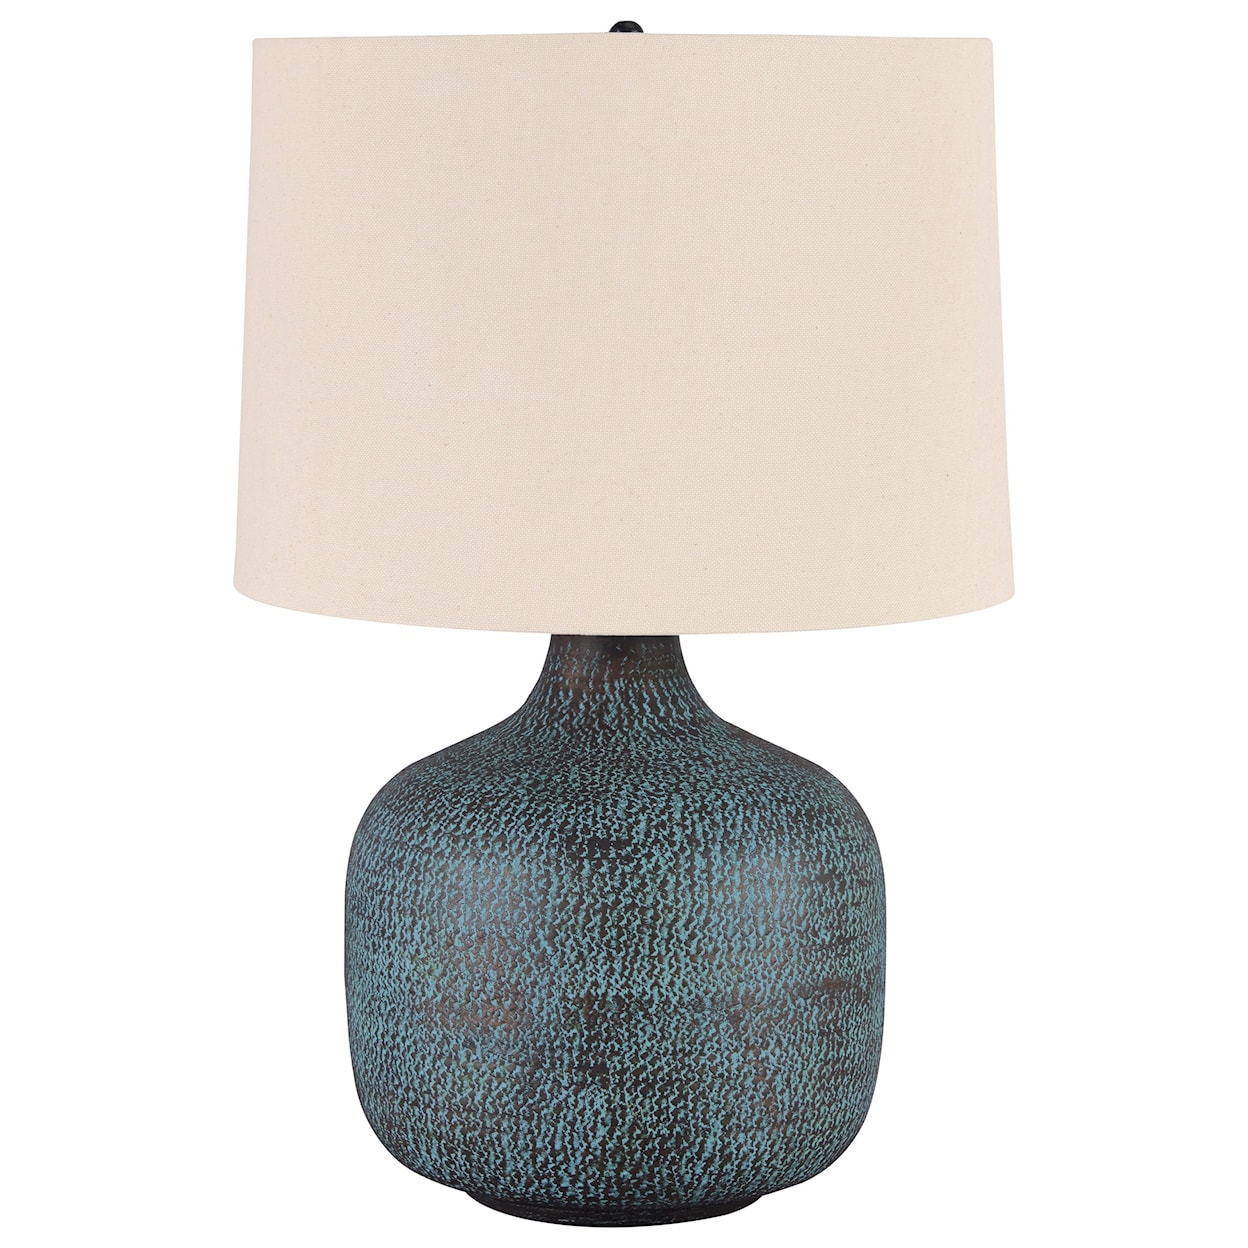 Signature Design by Ashley Lamps - Casual Malthace Patina Metal Table Lamp